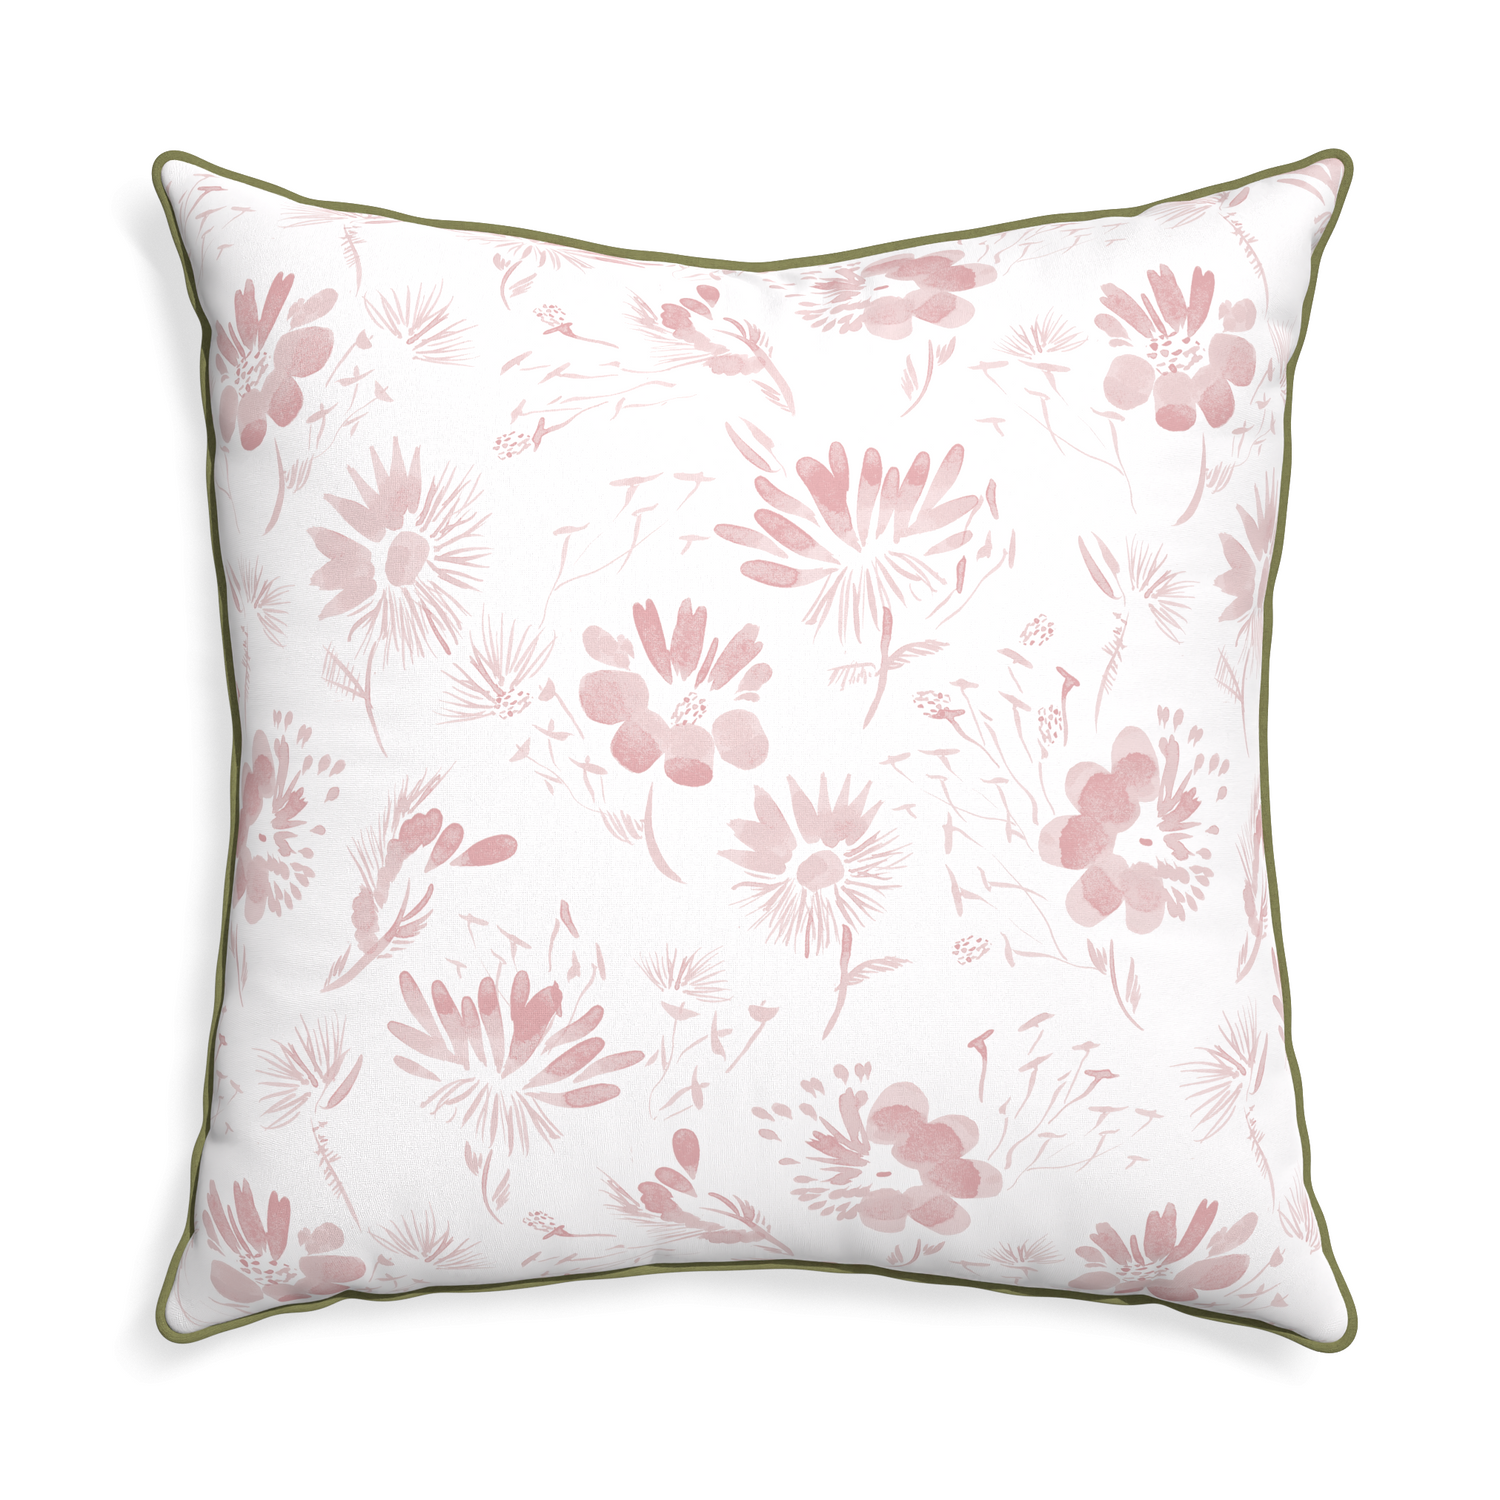 Euro-sham blake custom pink floralpillow with moss piping on white background